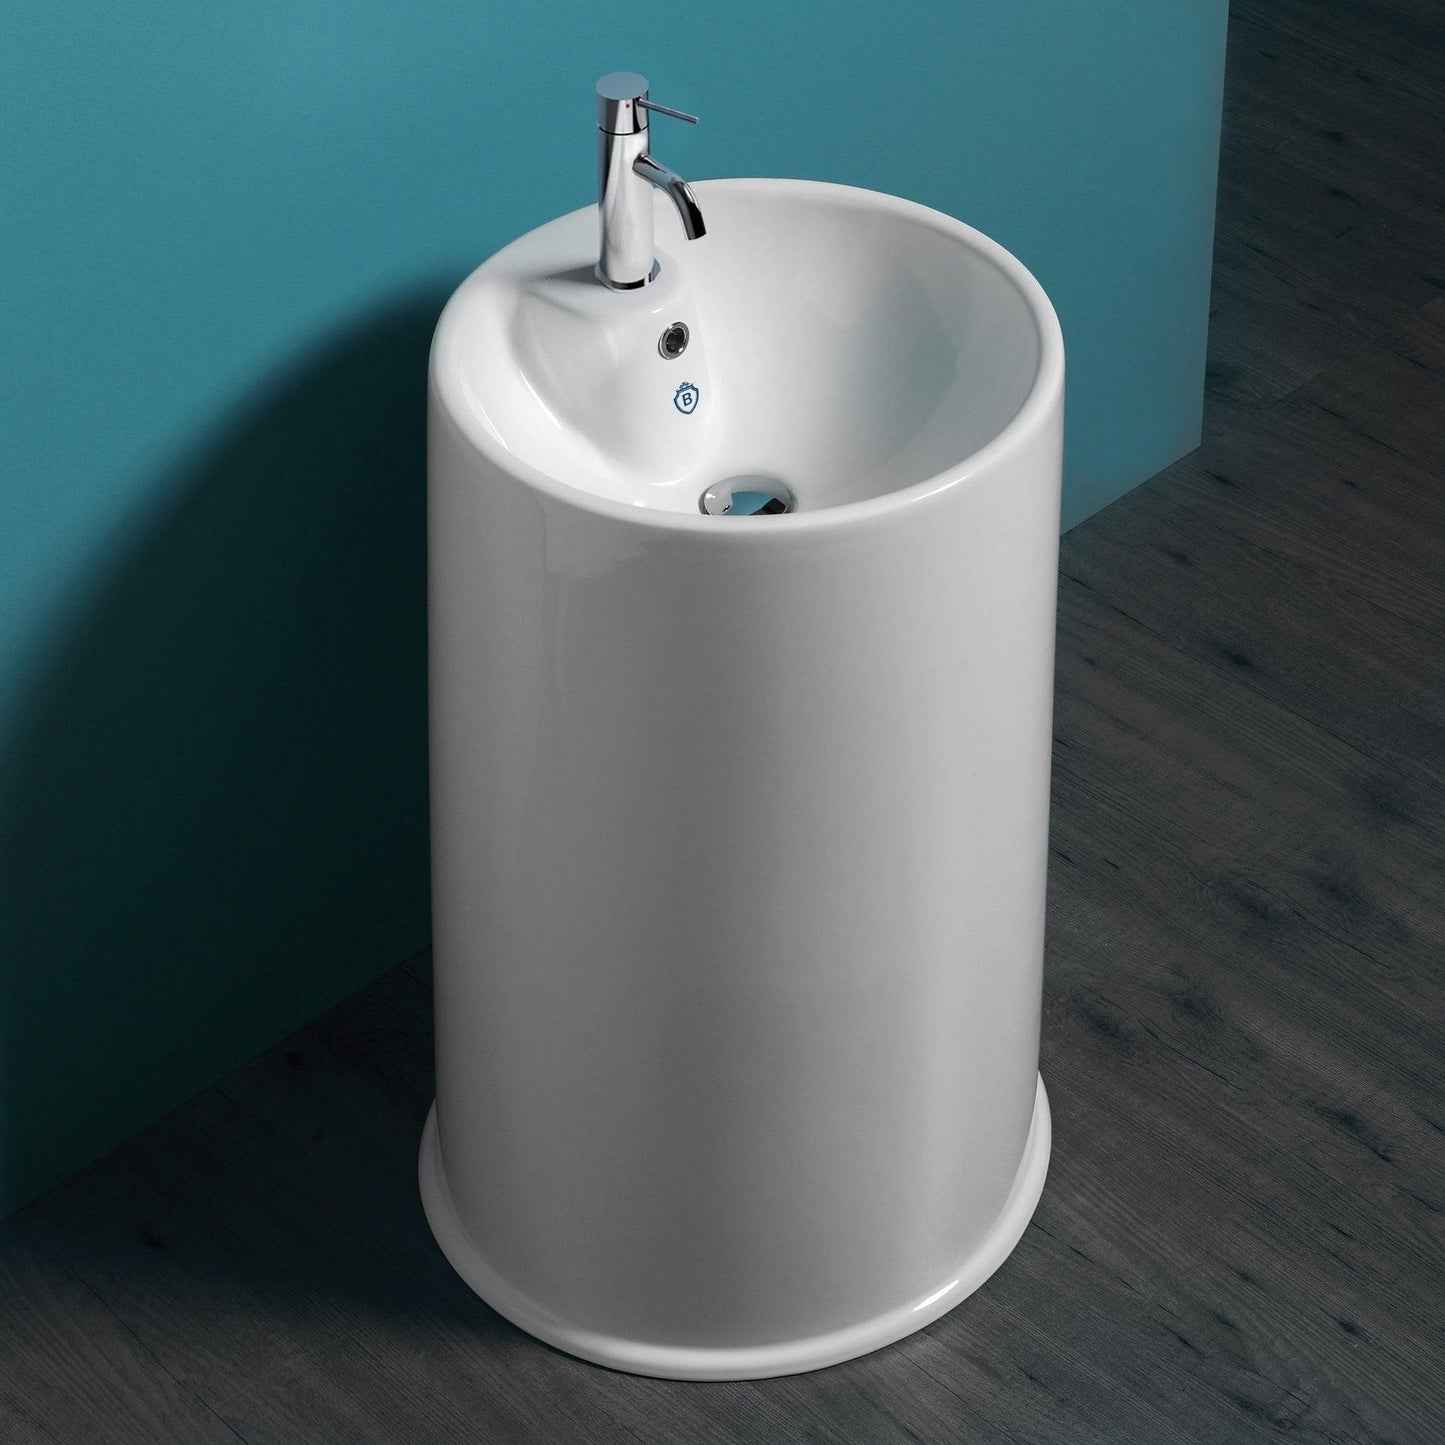 Whitehaus Britannia B-GTE White Freestanding Cylindrical Shaped Bathroom Basin With Single Faucet Hole Drill and Center Drain